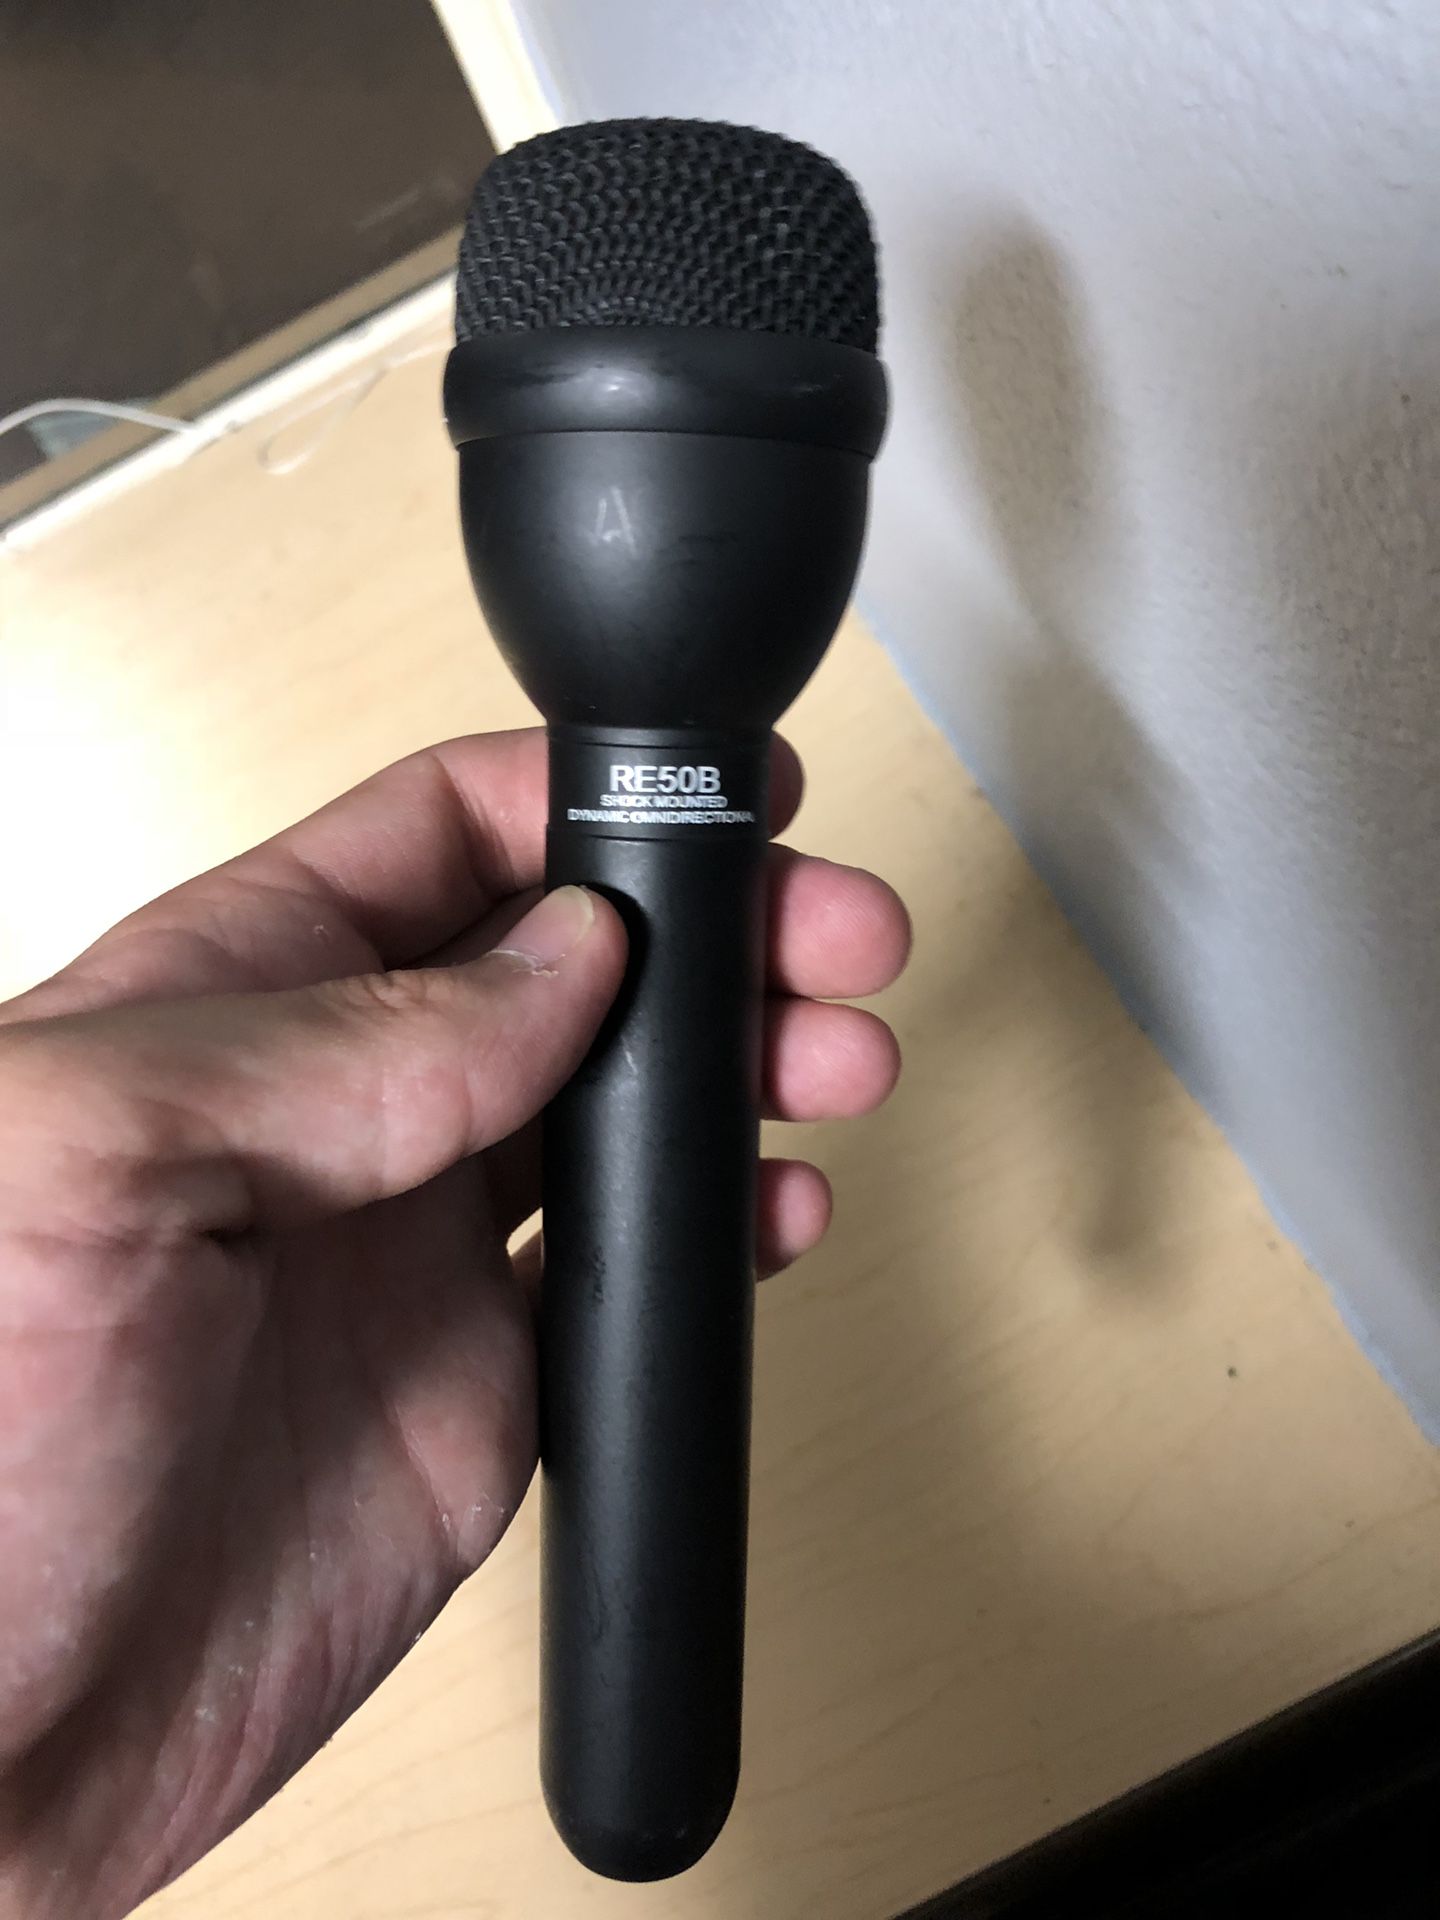 Electro-Voice RE50B Microphone for Sale in San Diego, CA OfferUp